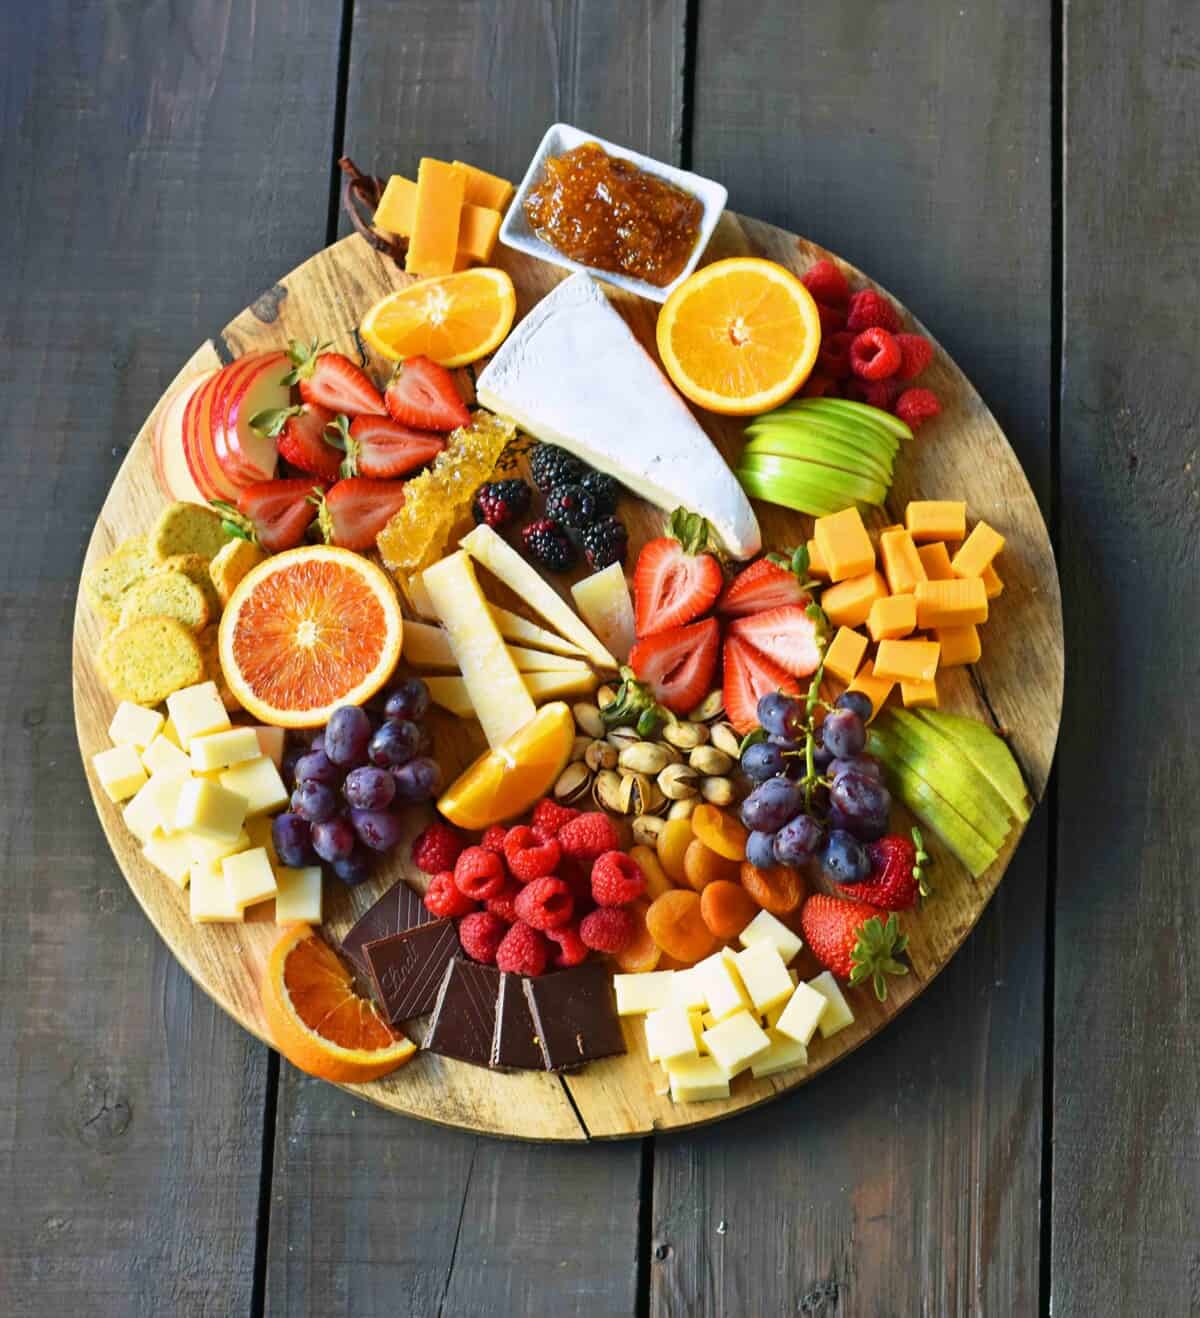 Unleash Your Inner Foodie: 41 Insta-Worthy Charcuterie Board Ideas That Will Make Your Guests Drool 4